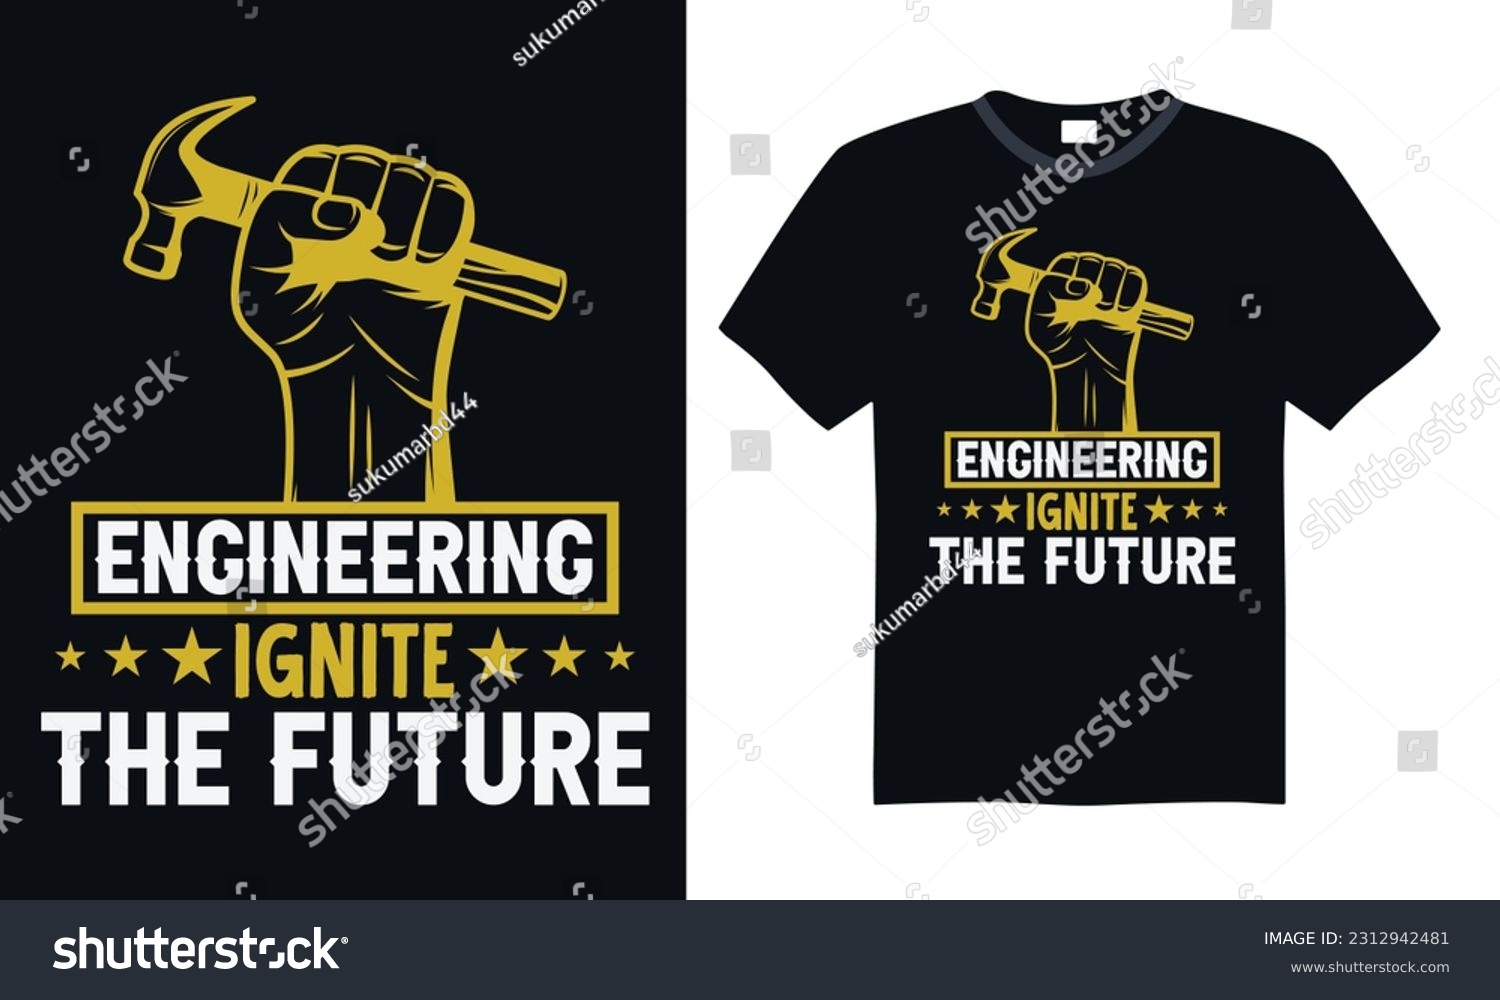 SVG of Engineering Ignite the Future - Engineering T-shirt Design, SVG Files for Cutting, Handmade calligraphy vector illustration, Hand written vector sign svg